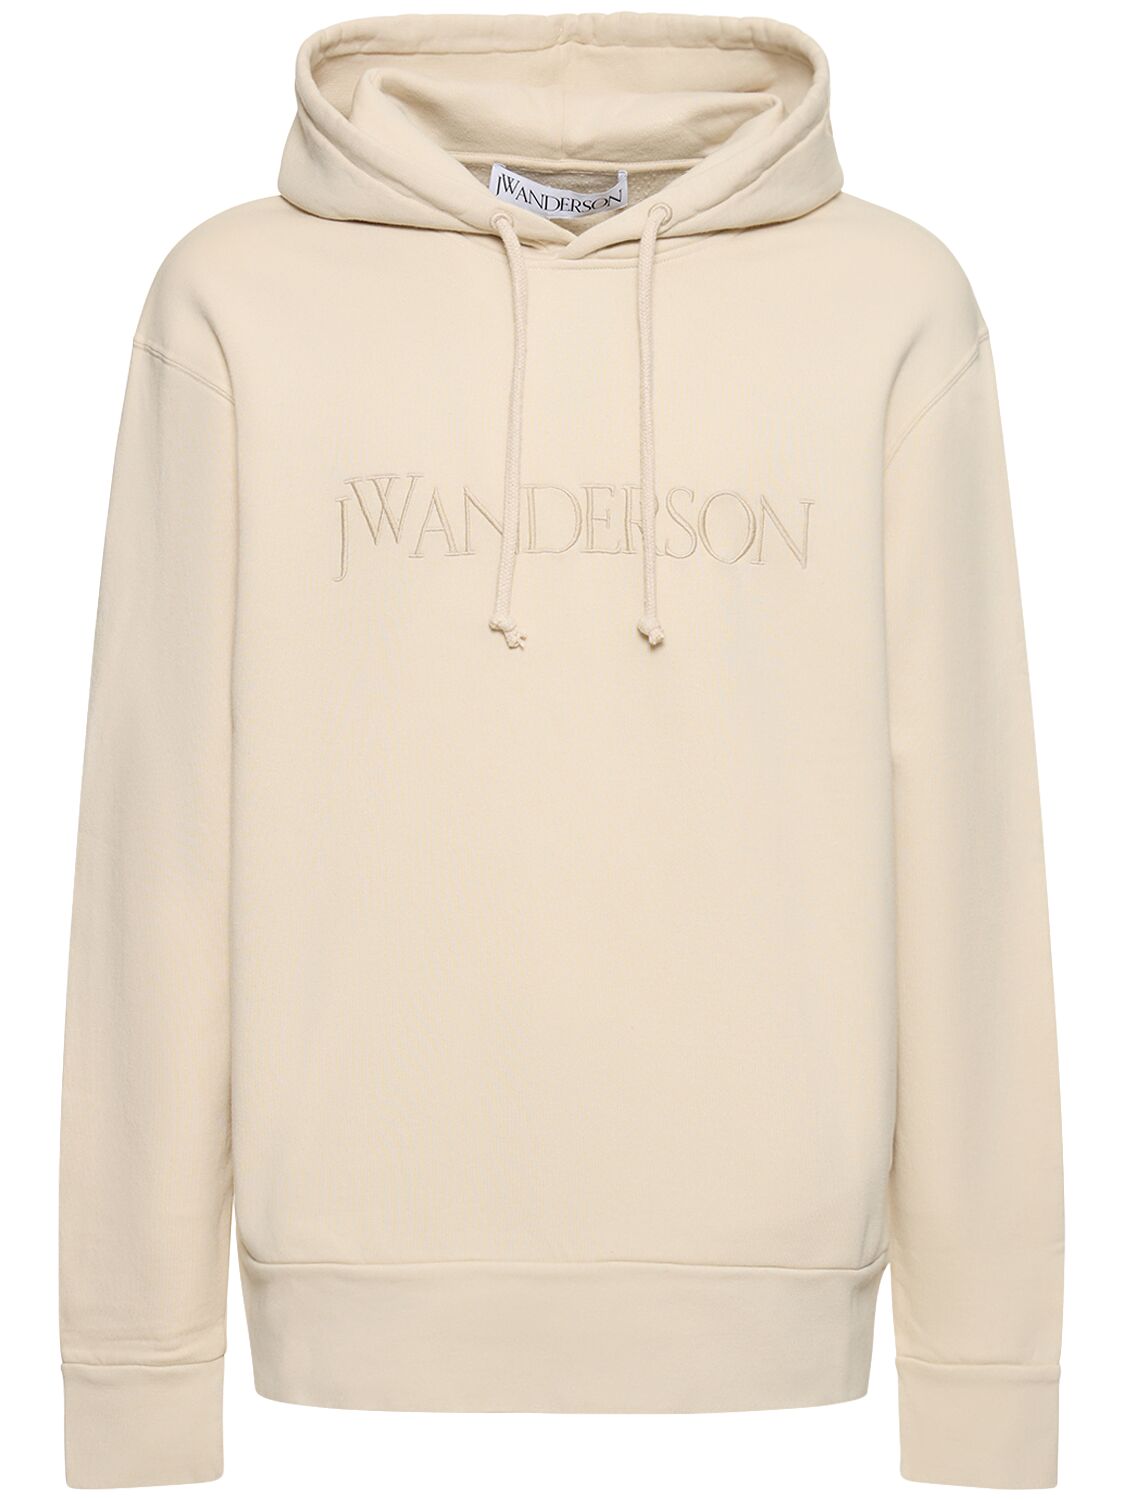 JW ANDERSON LOGO EMBROIDERY COTTON JERSEY HOODIE